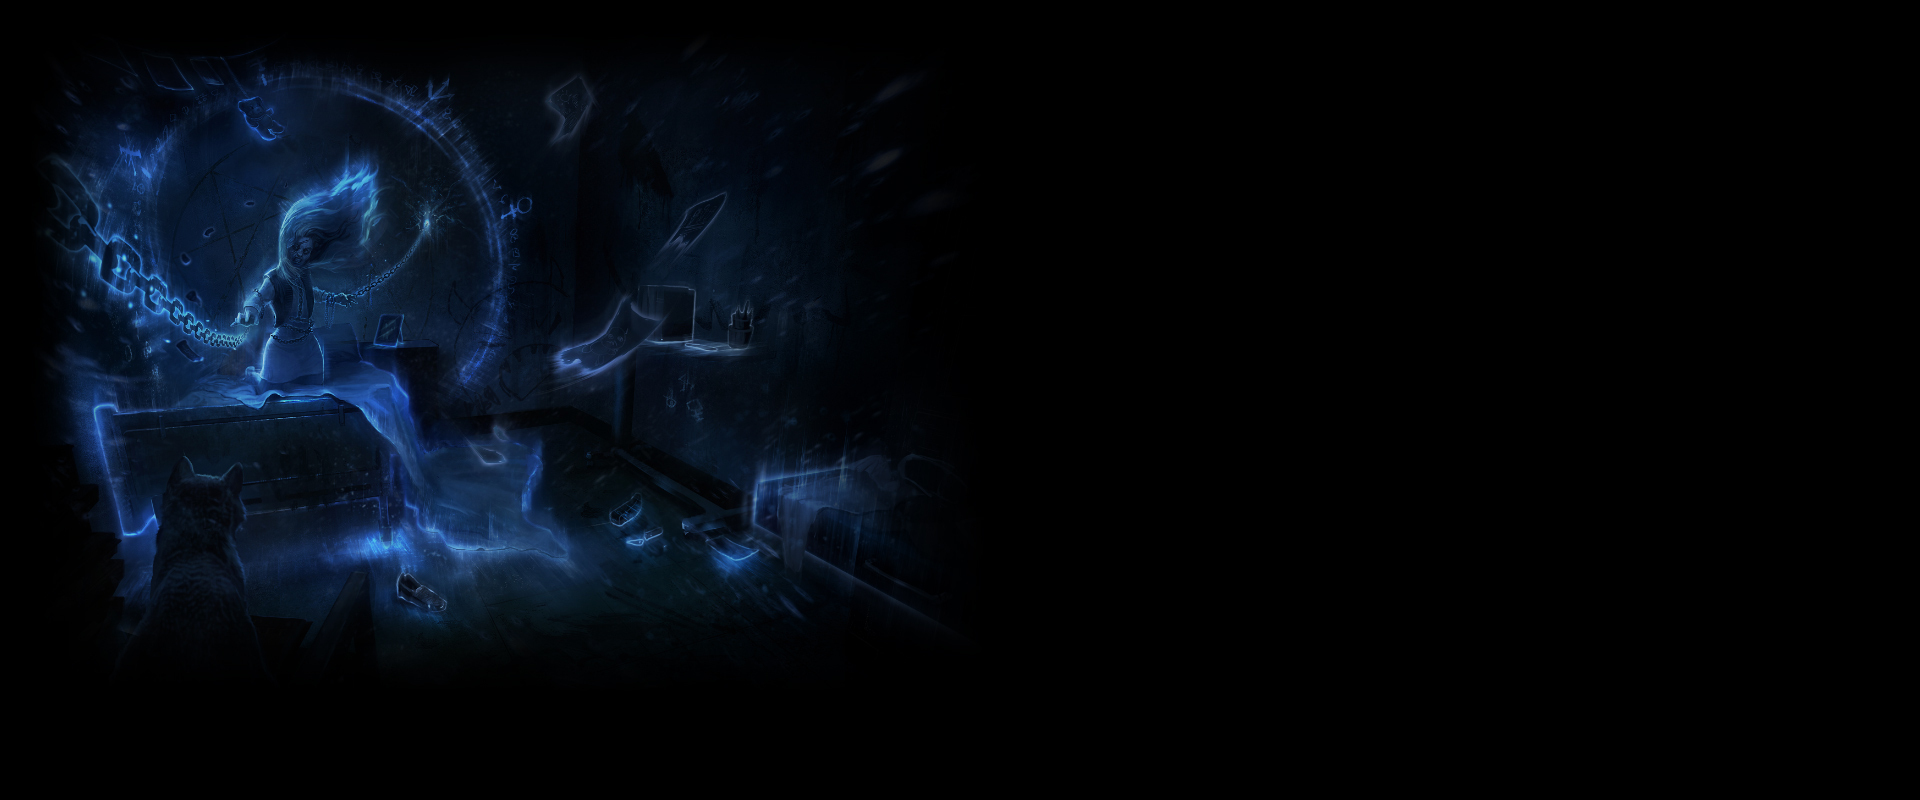  Murdered: Soul Suspect HQ Background Images